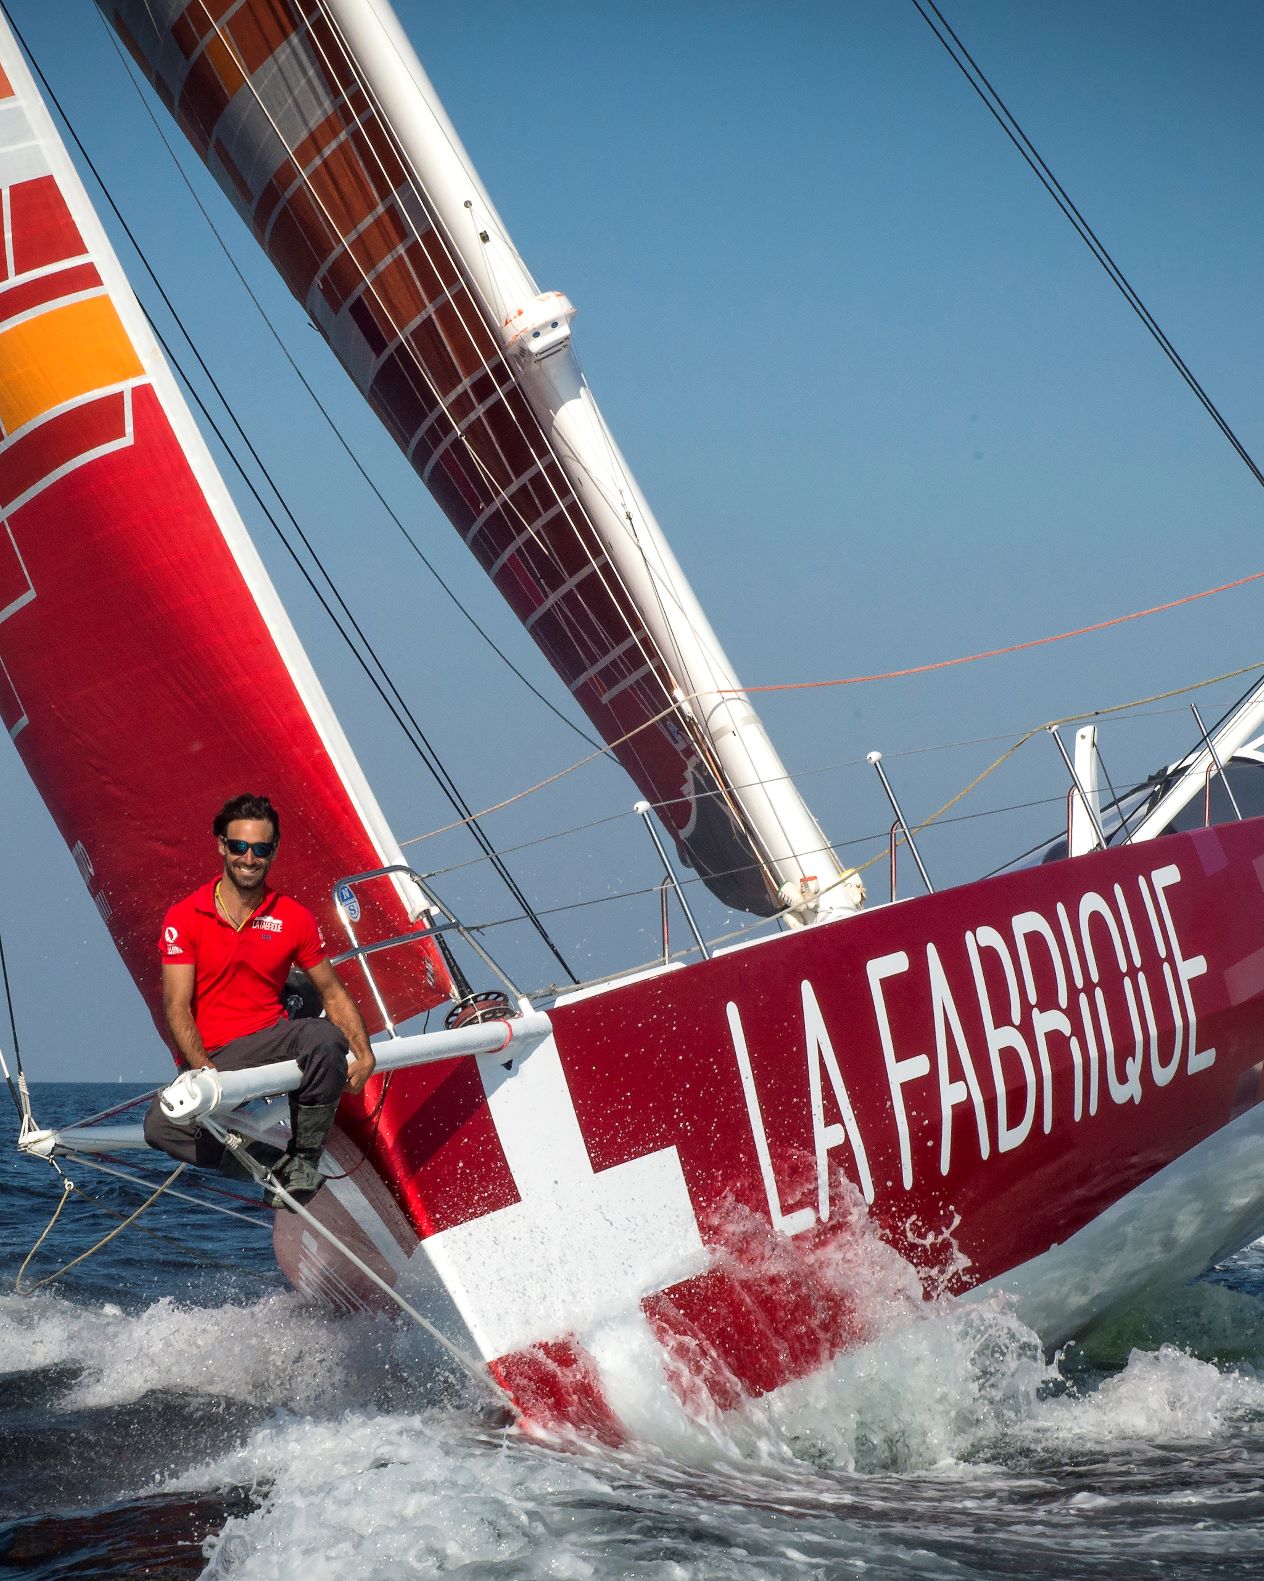 Alan Roura with La Fabrique, the boat with which he is going to take part in the Vendée Globe race